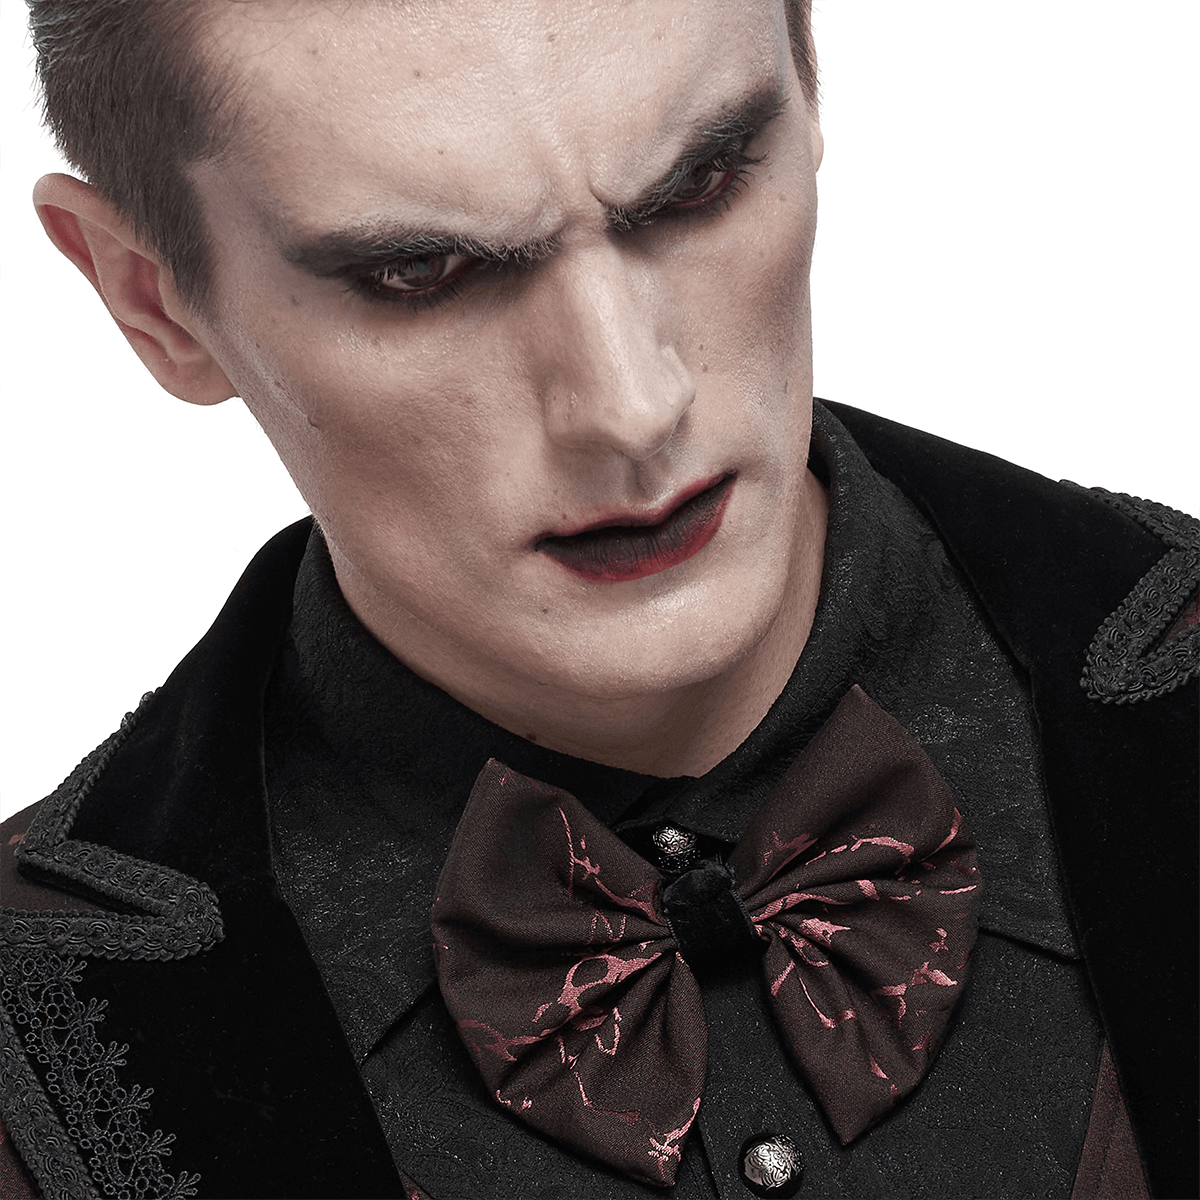 Gothic Wine Red Jacquard Bowtie / Men's Lace-up design Bowtie / Fashion Male Accessories - HARD'N'HEAVY